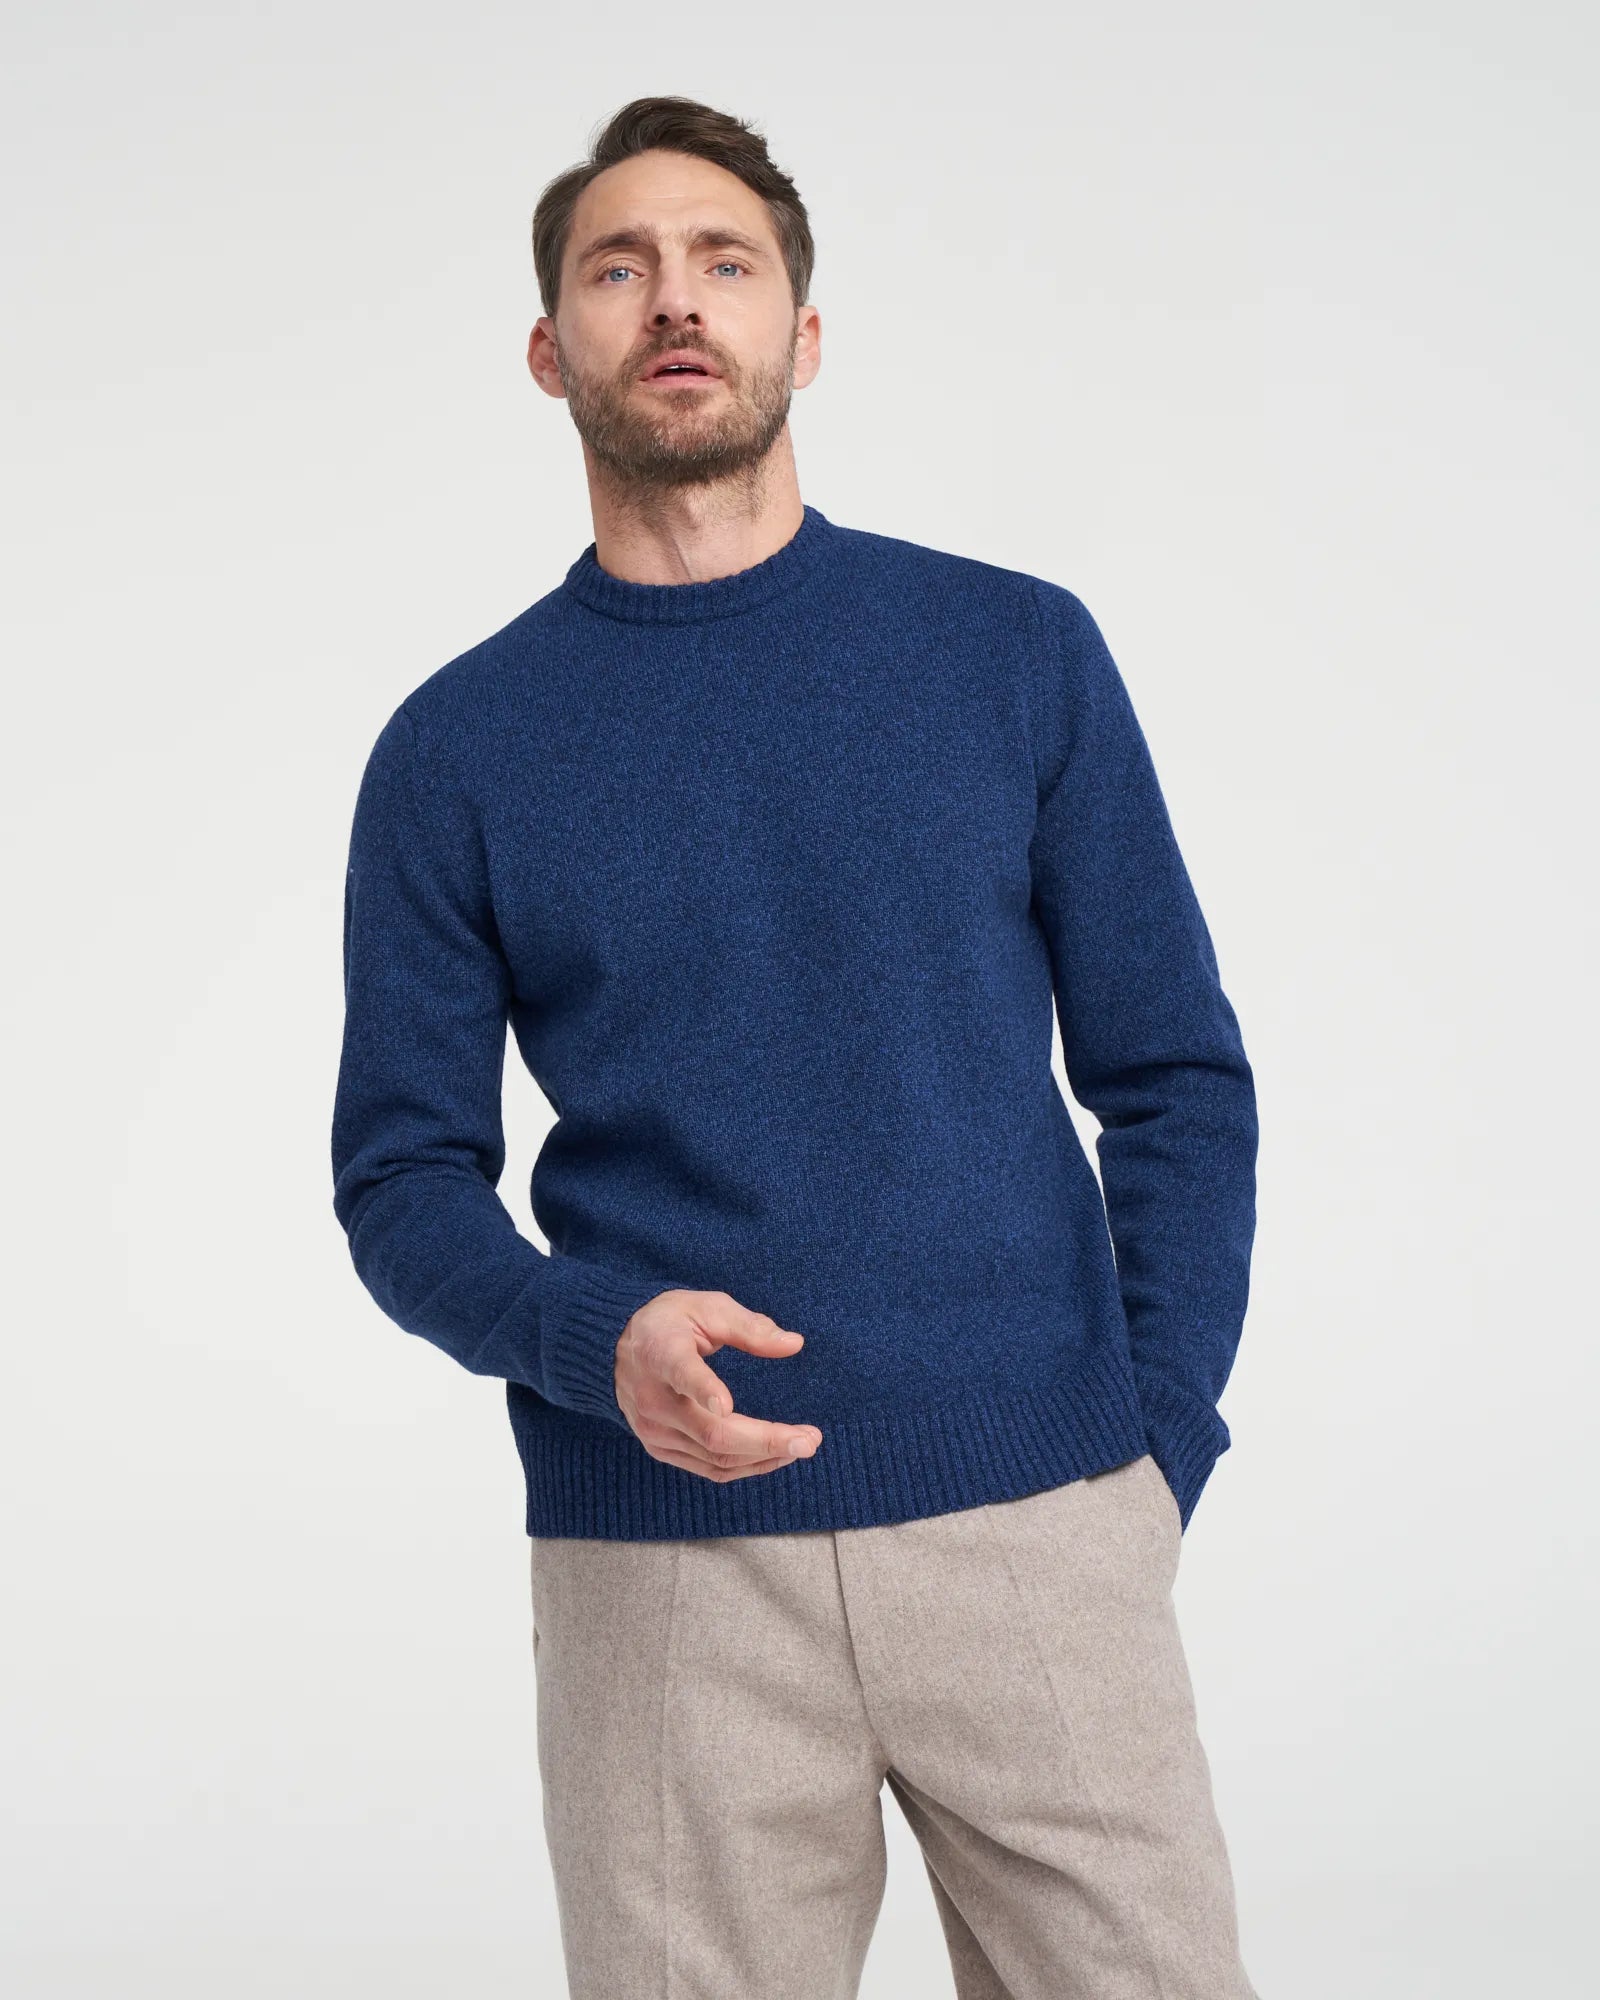 Charles Crew Neck Knitted Sweater - Cobalt Blue